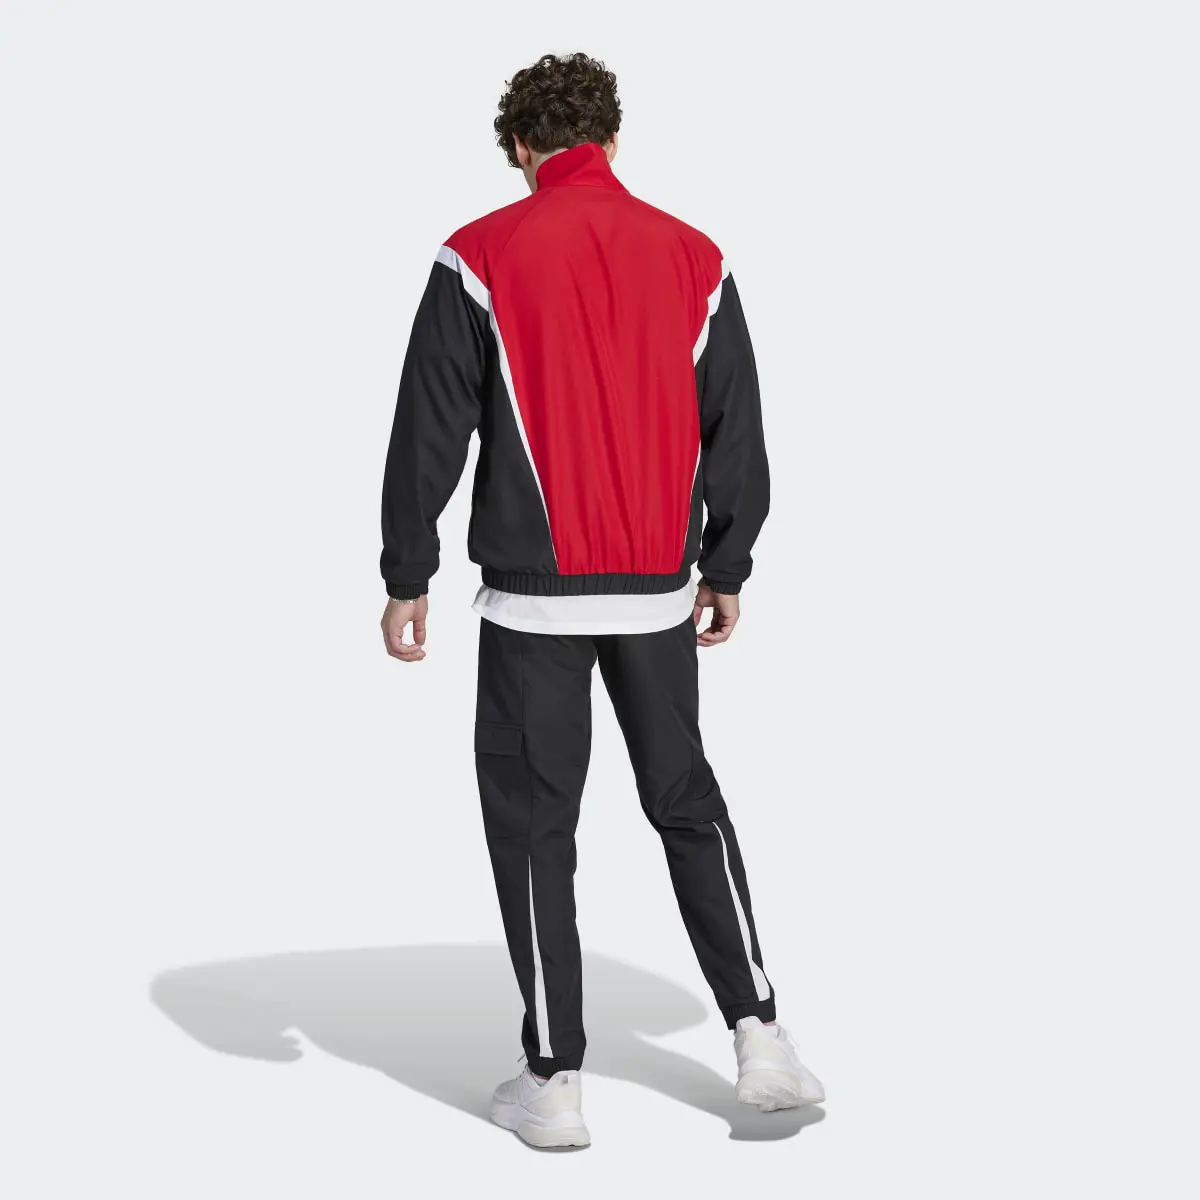 Adidas Sportswear Woven Non-Hooded Track Suit. 3